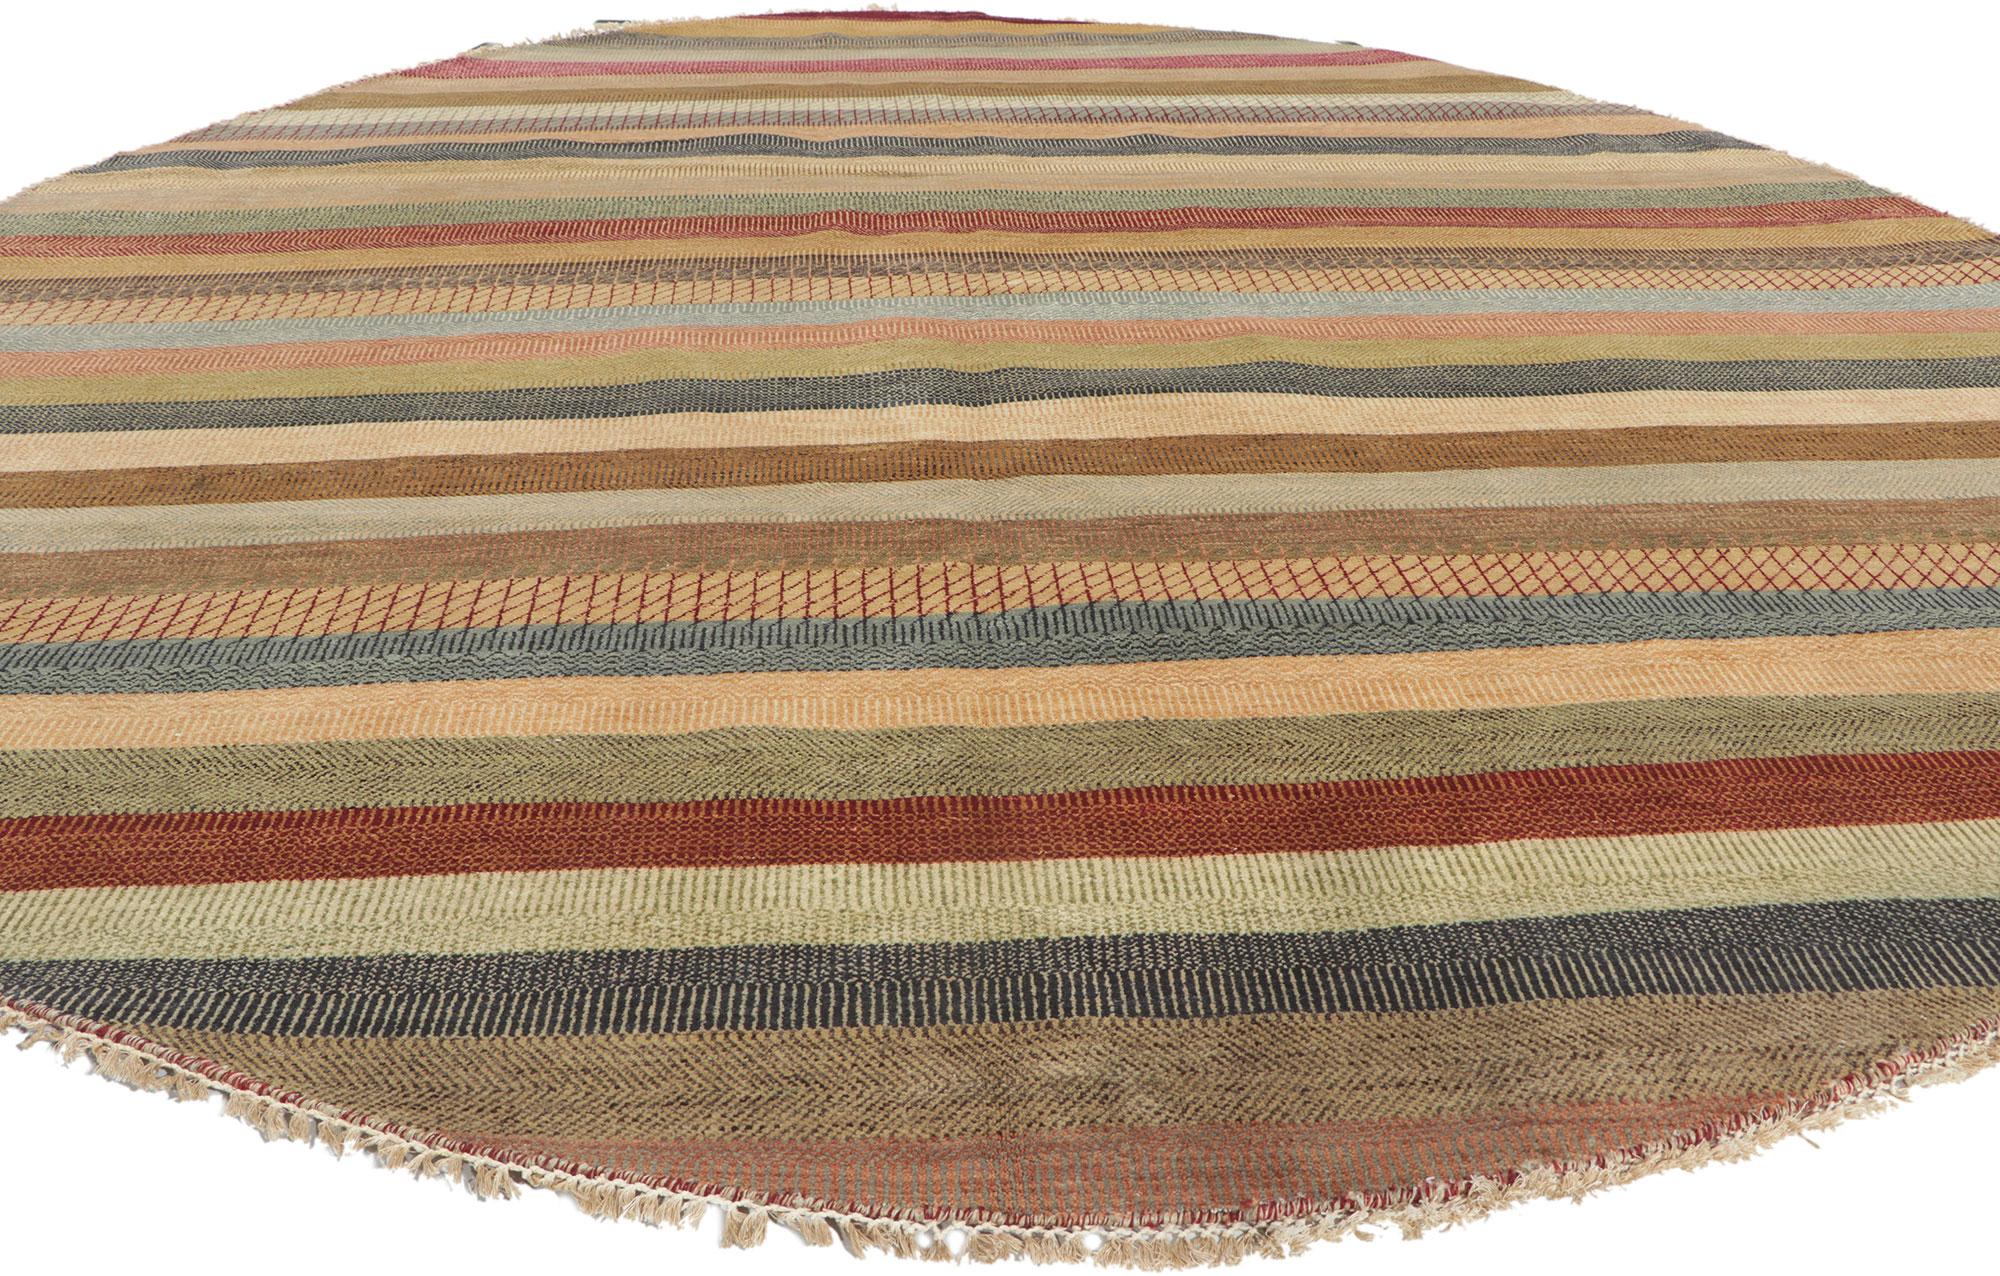 30300 New Contemporary Round Striped Area Rug 08'11 x 09'00.
This hand-knotted wool new contemporary round area rug features a striped pattern composed of both wide and narrow bands spread across the abrashed field. The overall design aesthetic is